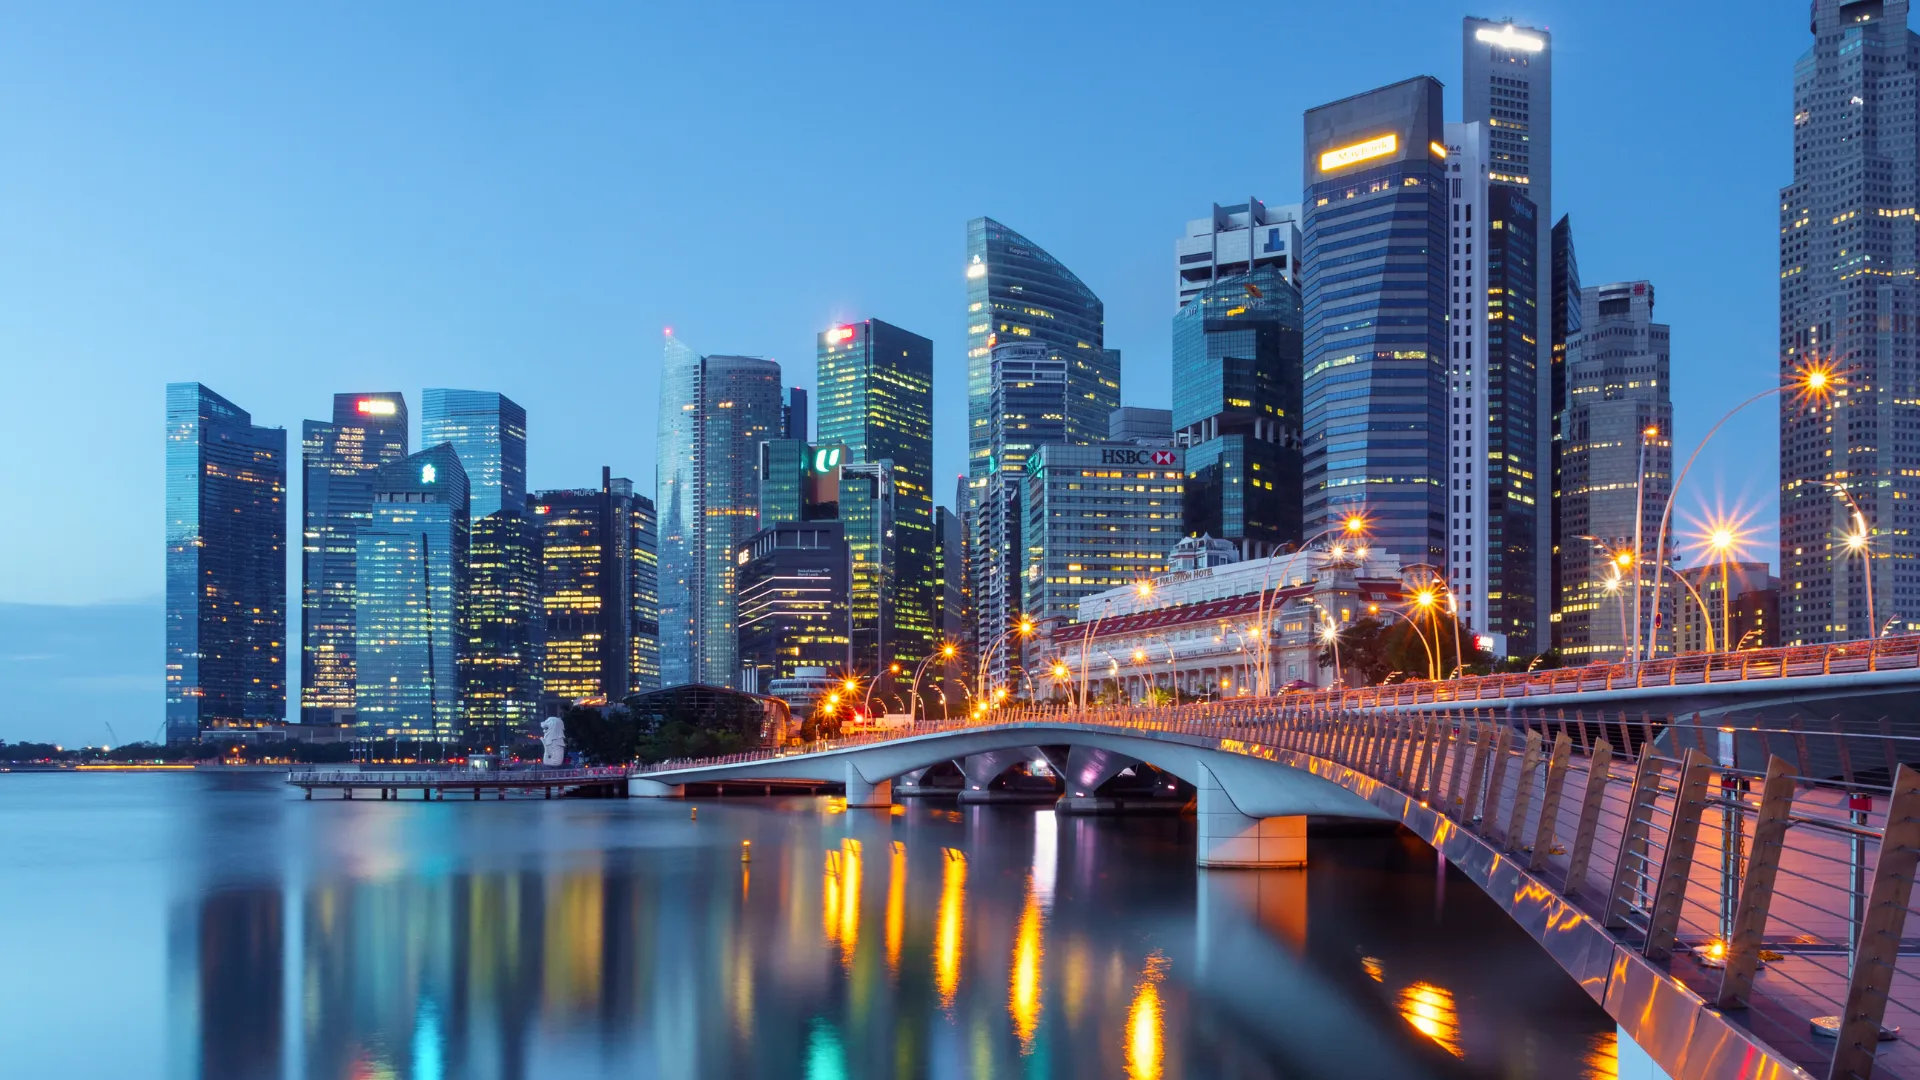 Faststream relocates its Singapore Head Office to larger premises